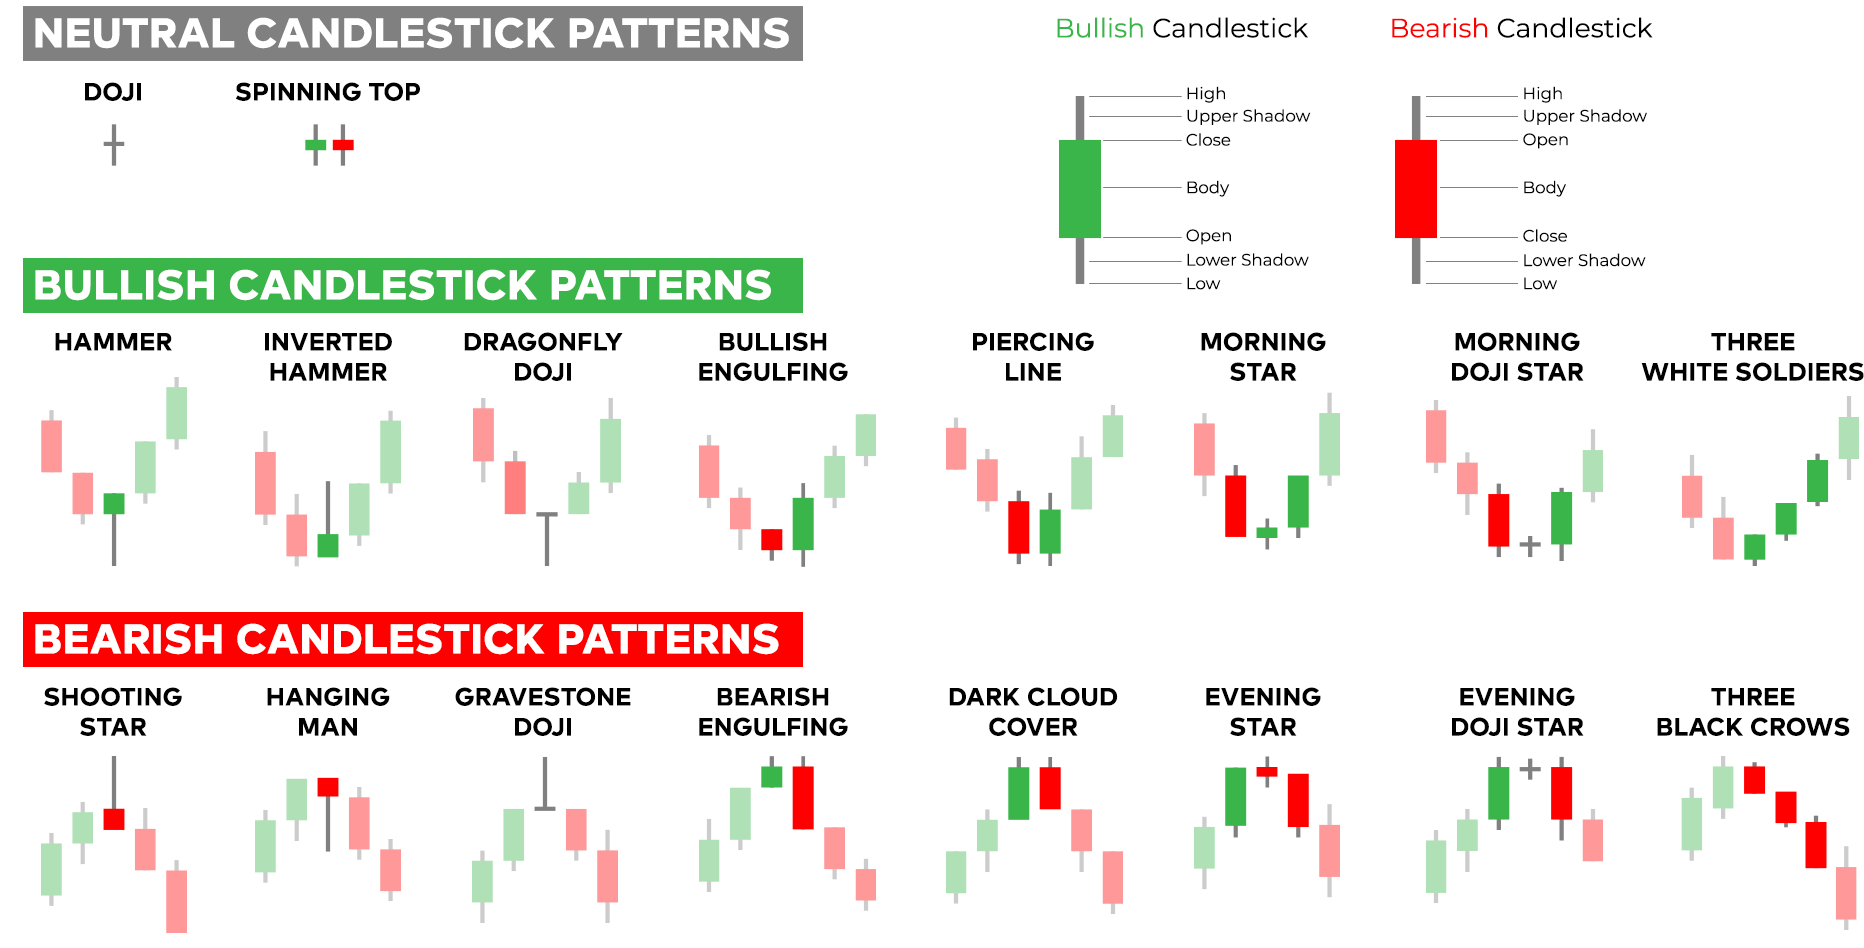 Candlestick Patterns Explained - HOW TO READ CANDLESTICKS